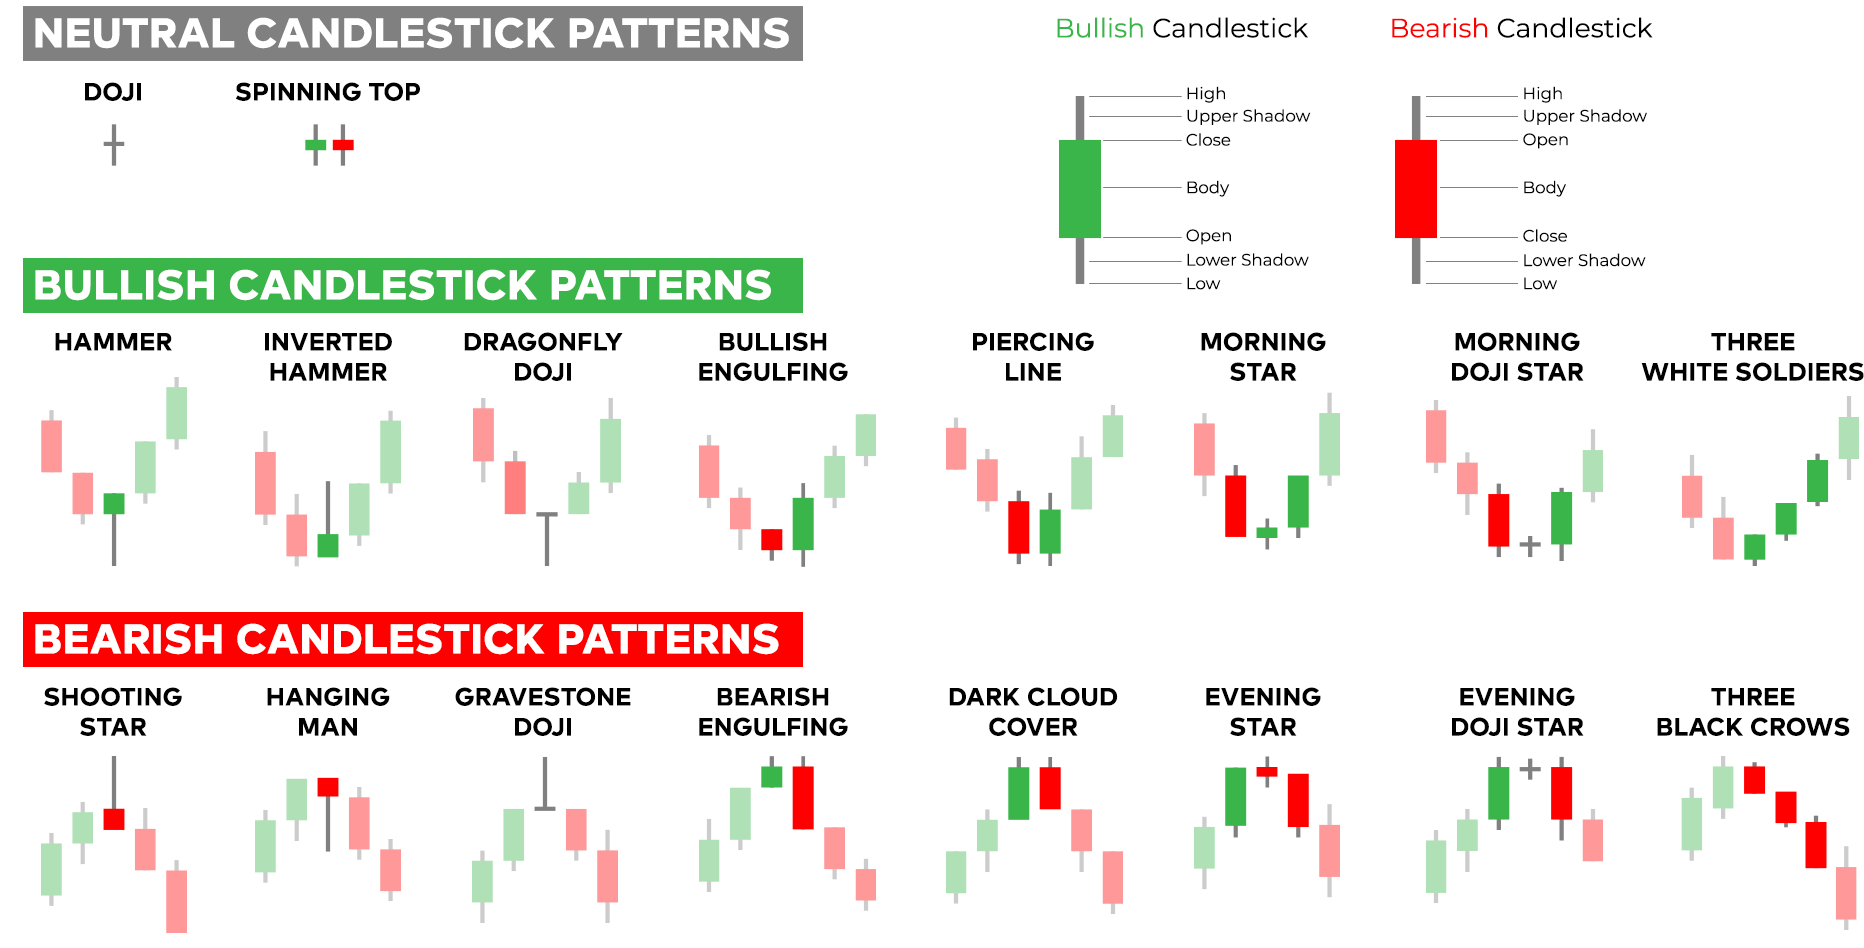 Candlestick Patterns Explained - HOW TO READ CANDLESTICKS